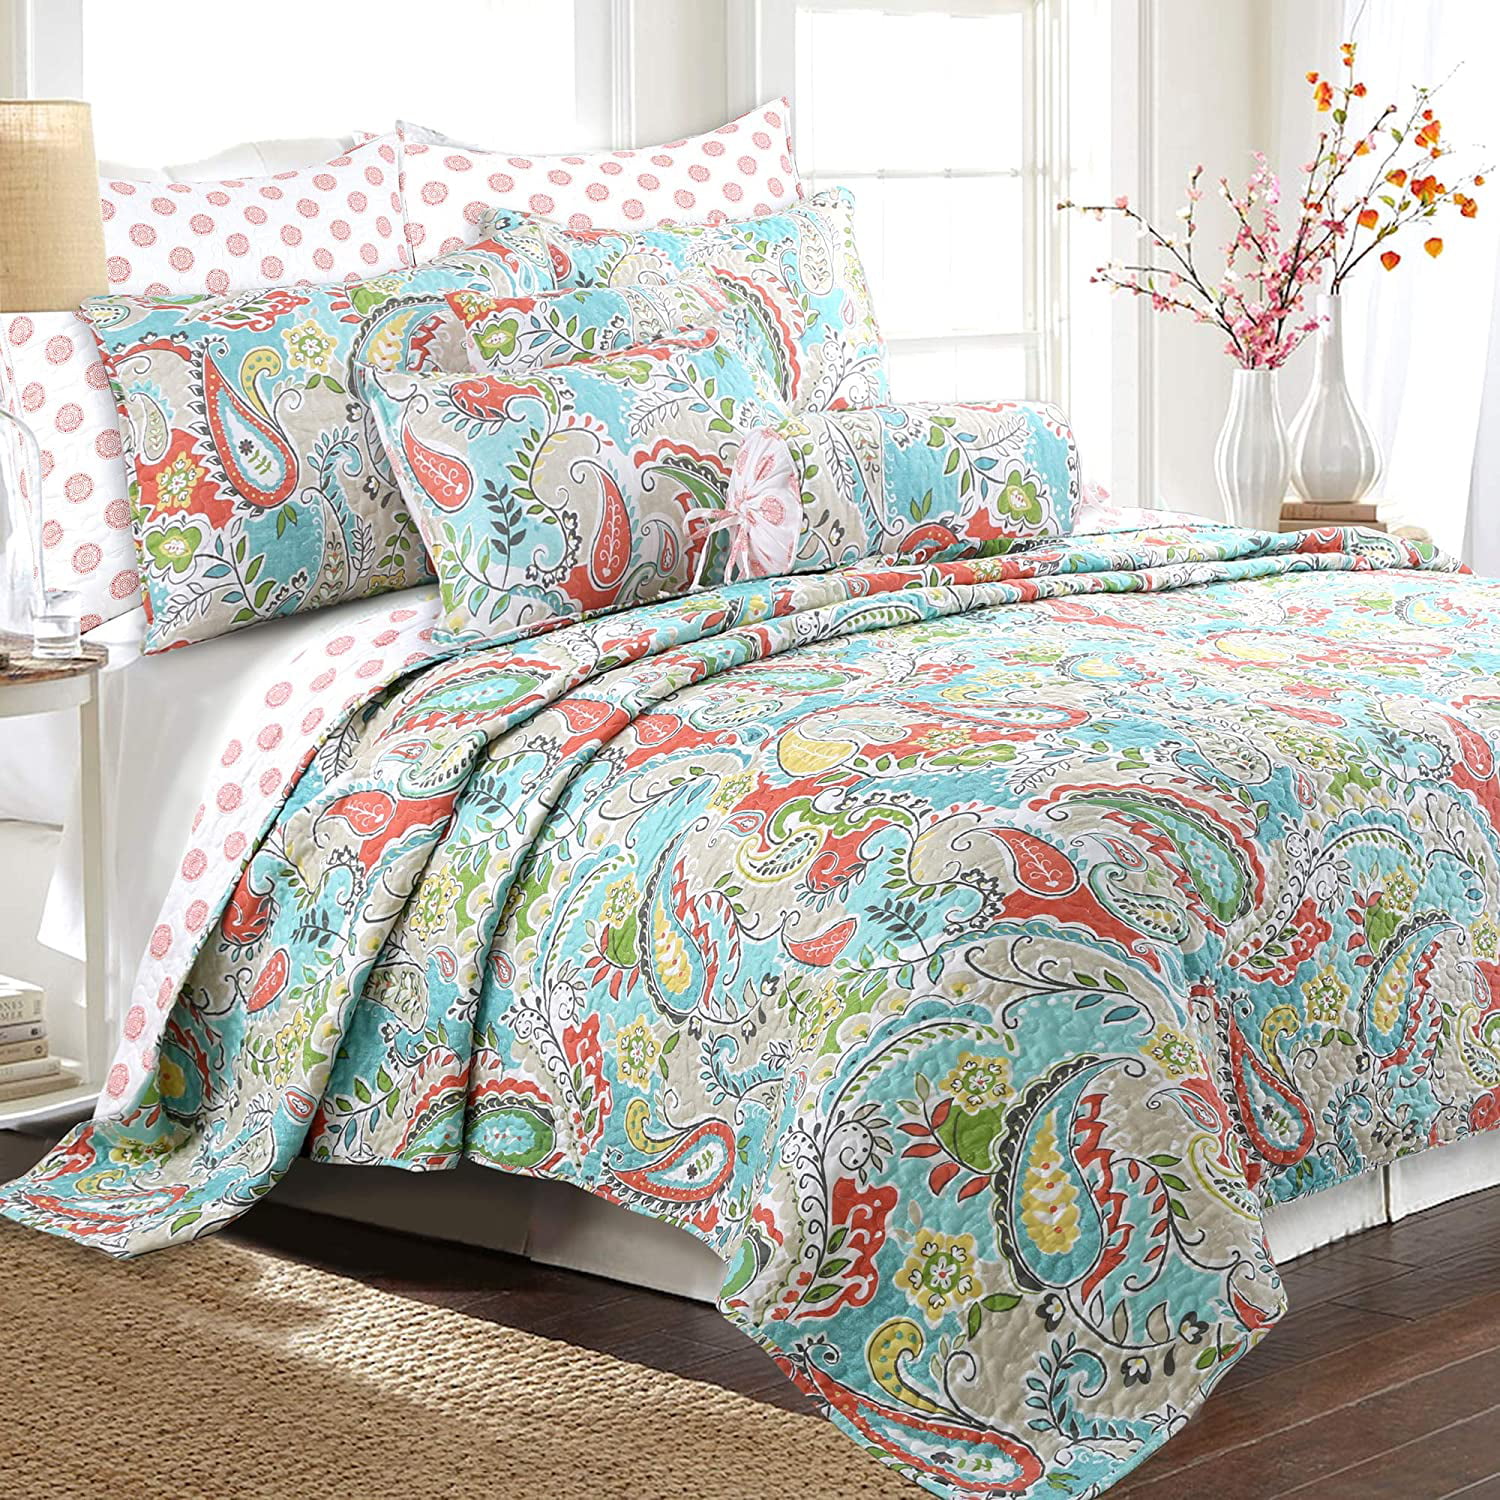 Details about   Cozy Line Home Fashions Vintage Floral Quilted Throw 100% Cotton Reversible All 